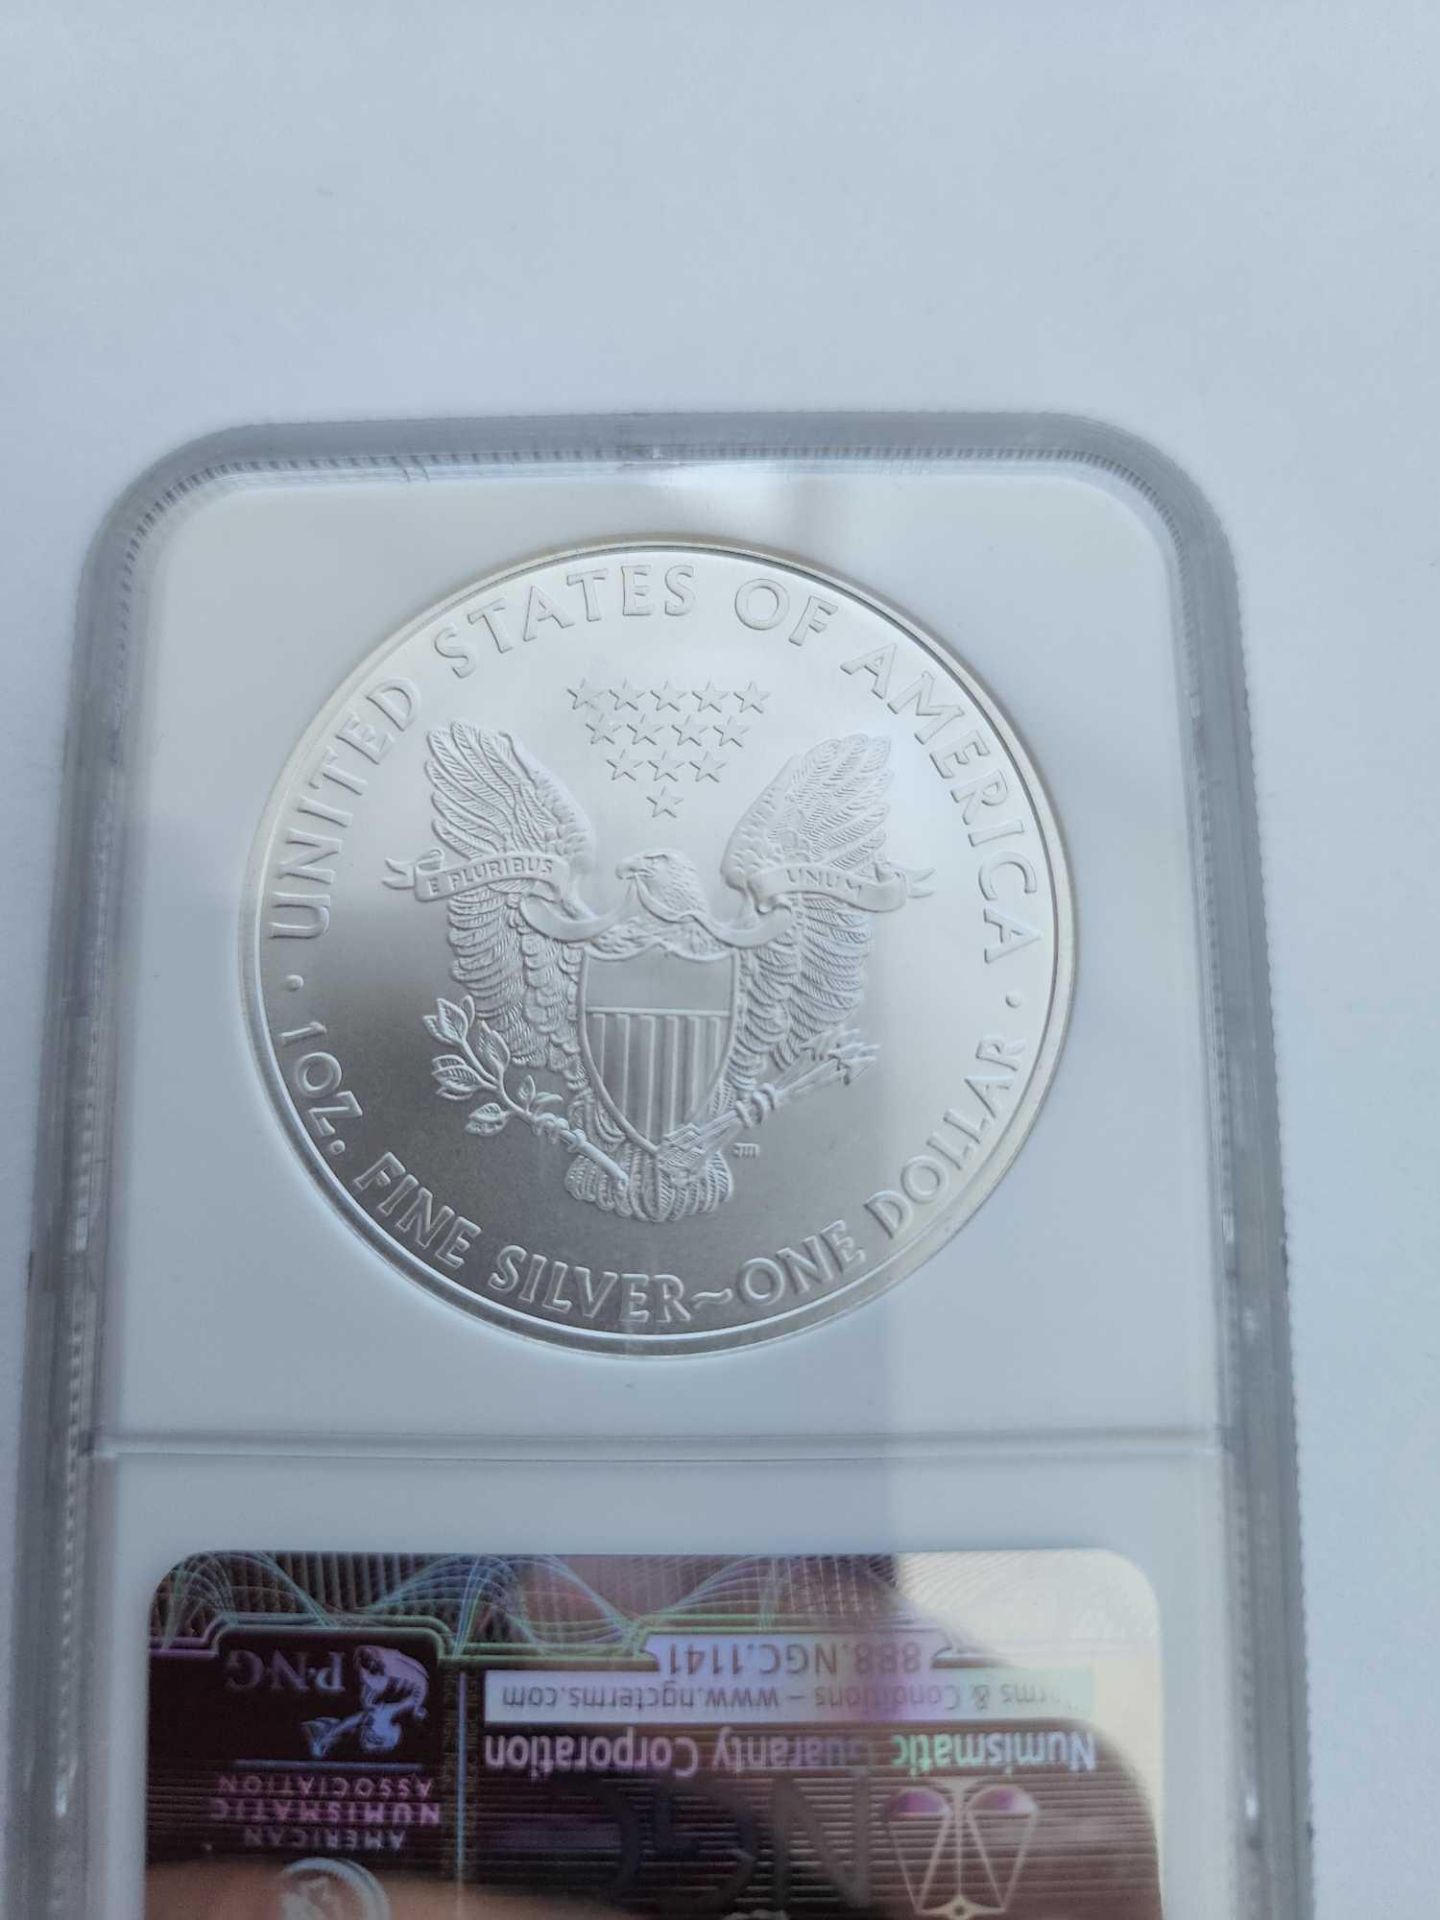 2010 Graded Silver Dollar - Image 2 of 2